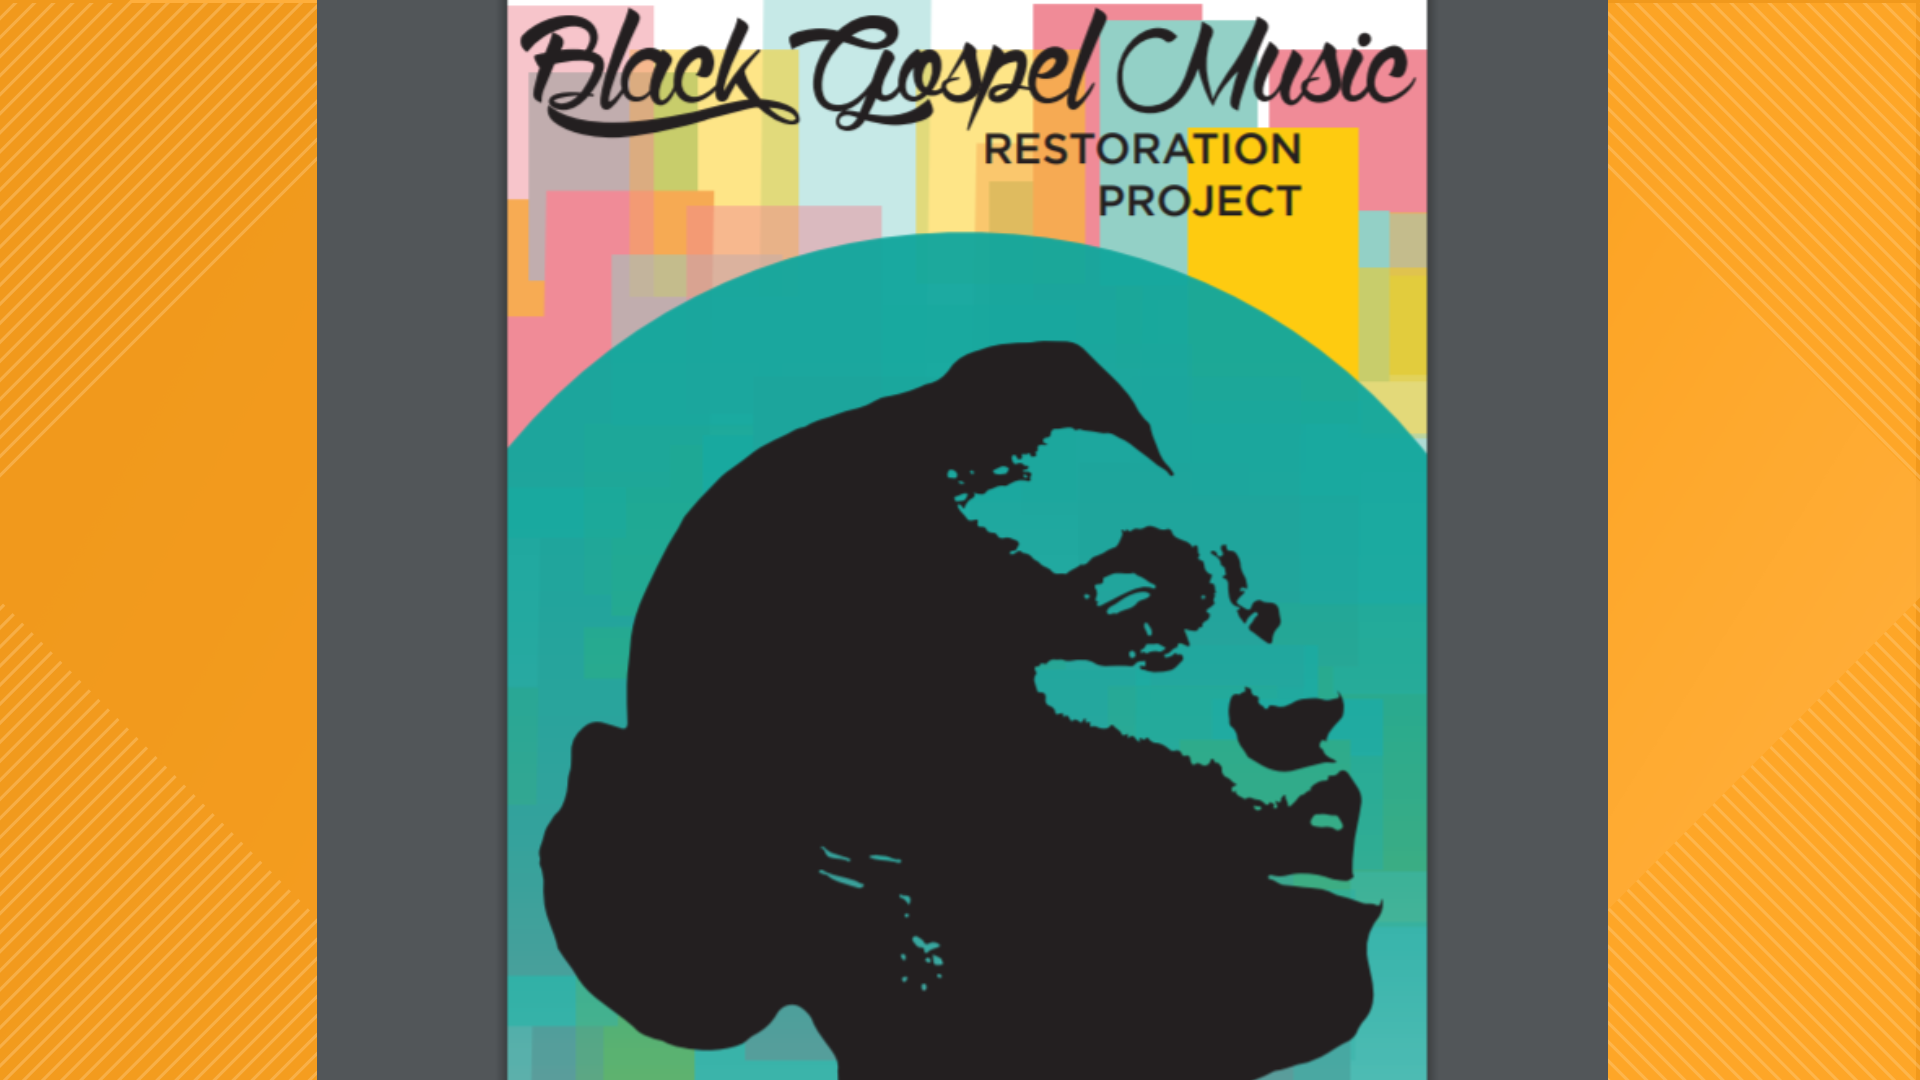 Robert Darden’s black gospel music restoration project has flourished since 2005 to become one of the largest of its kind.